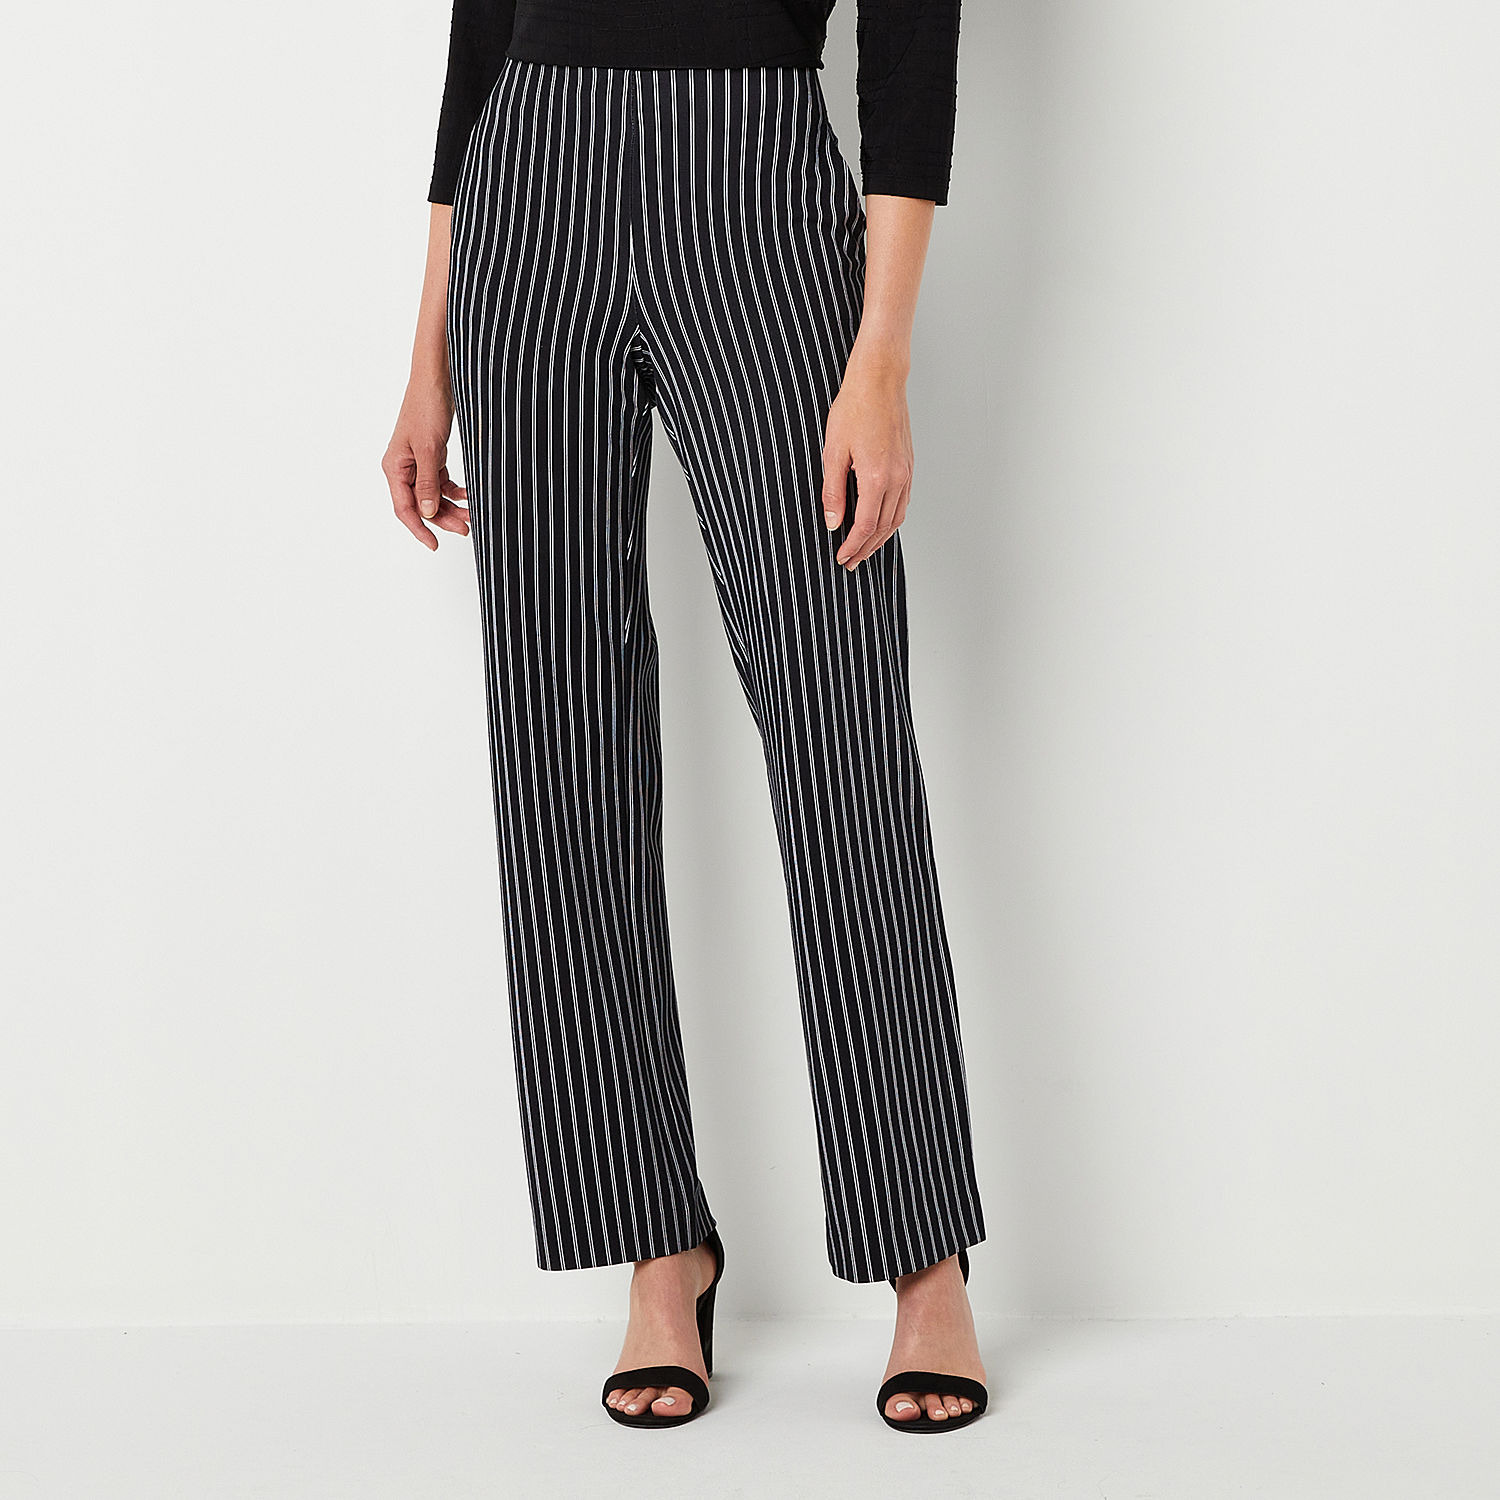 Liz Claiborne Audra Ponte Womens Straight Pull-On Pants - JCPenney